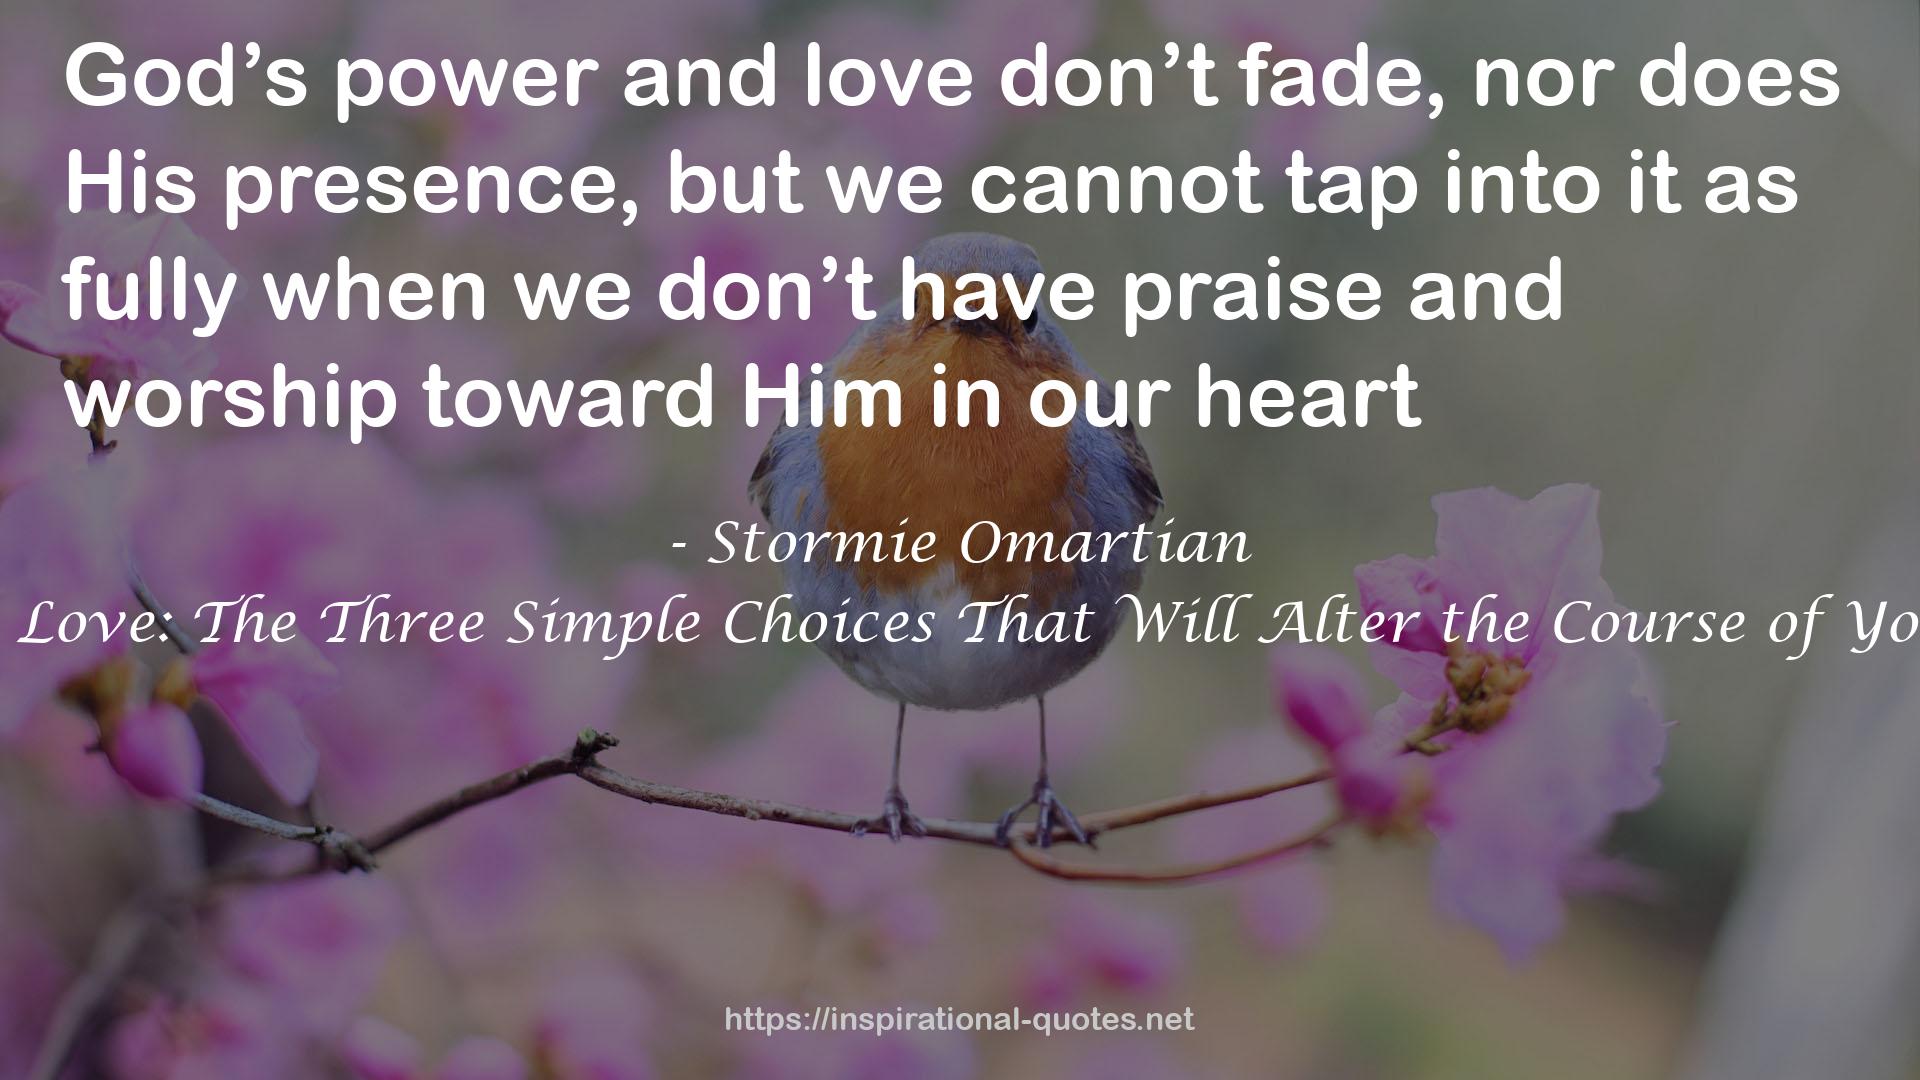 Choose Love: The Three Simple Choices That Will Alter the Course of Your Life QUOTES